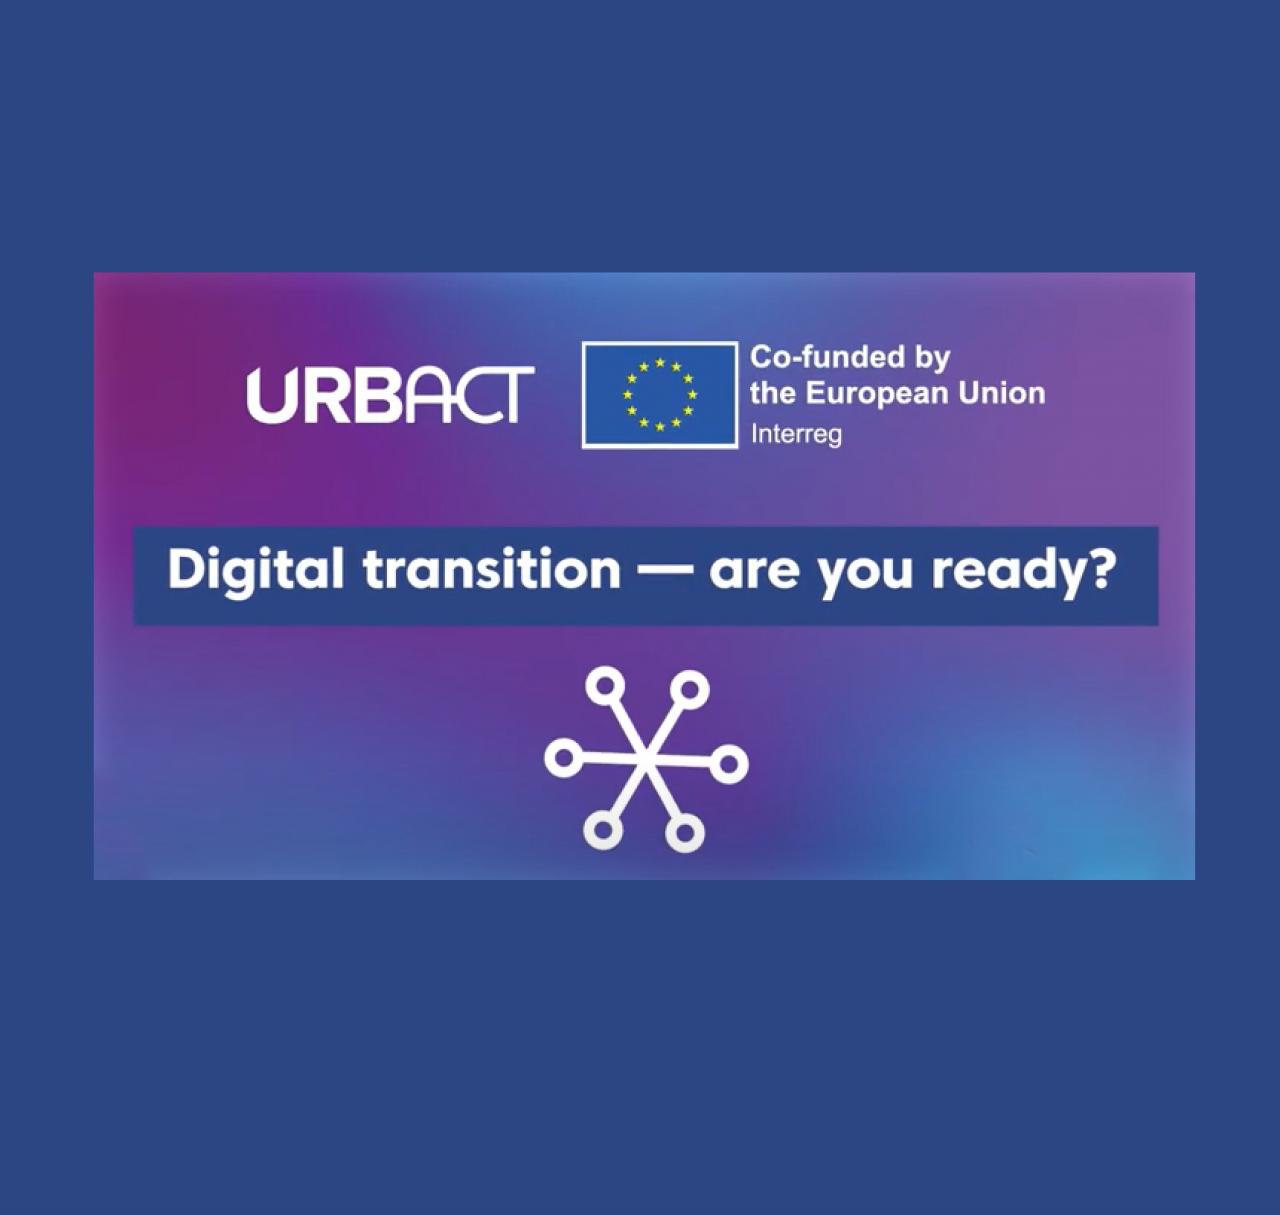 Digital transition - are you ready?